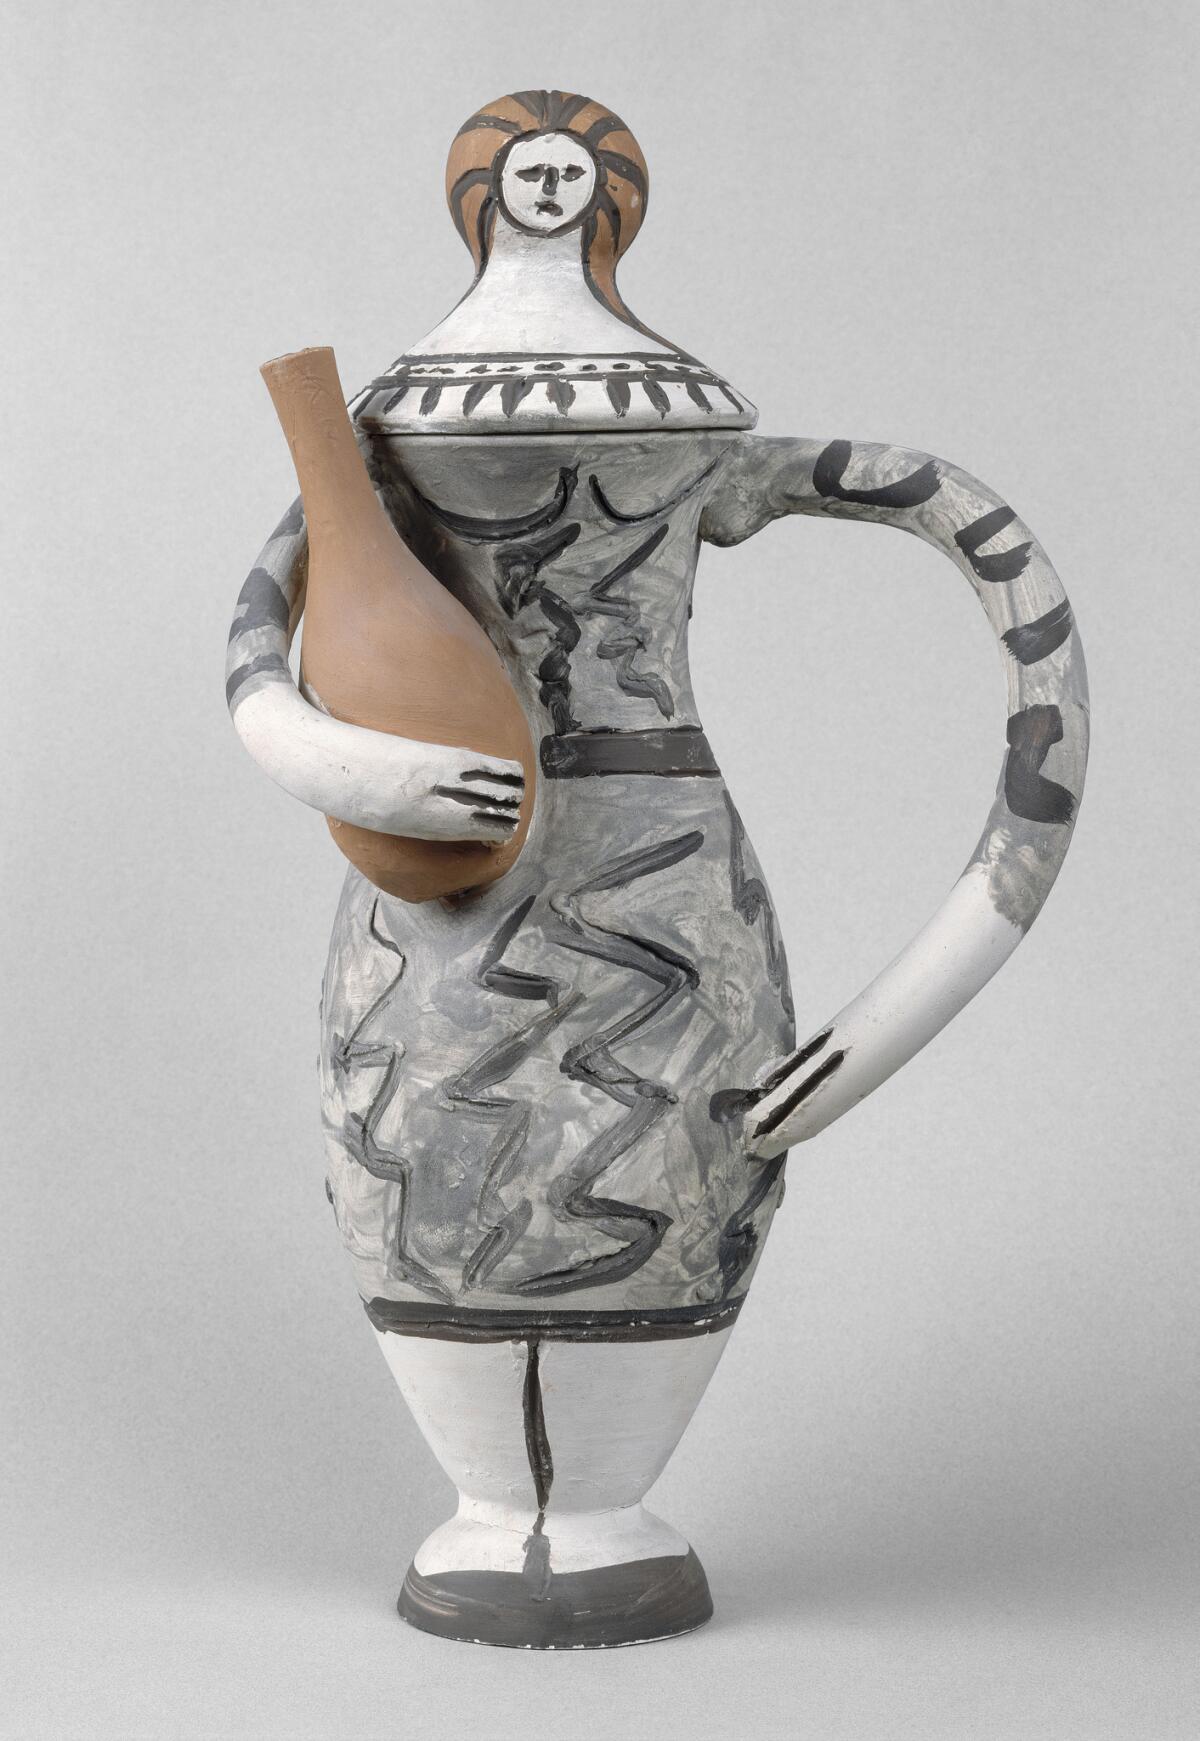 Picasso's "Femme à l'amphore," 1947-48. White earthenware decorated with slips and incised, 49 centimeters by 26.5 centimeters by 18 centimeters.